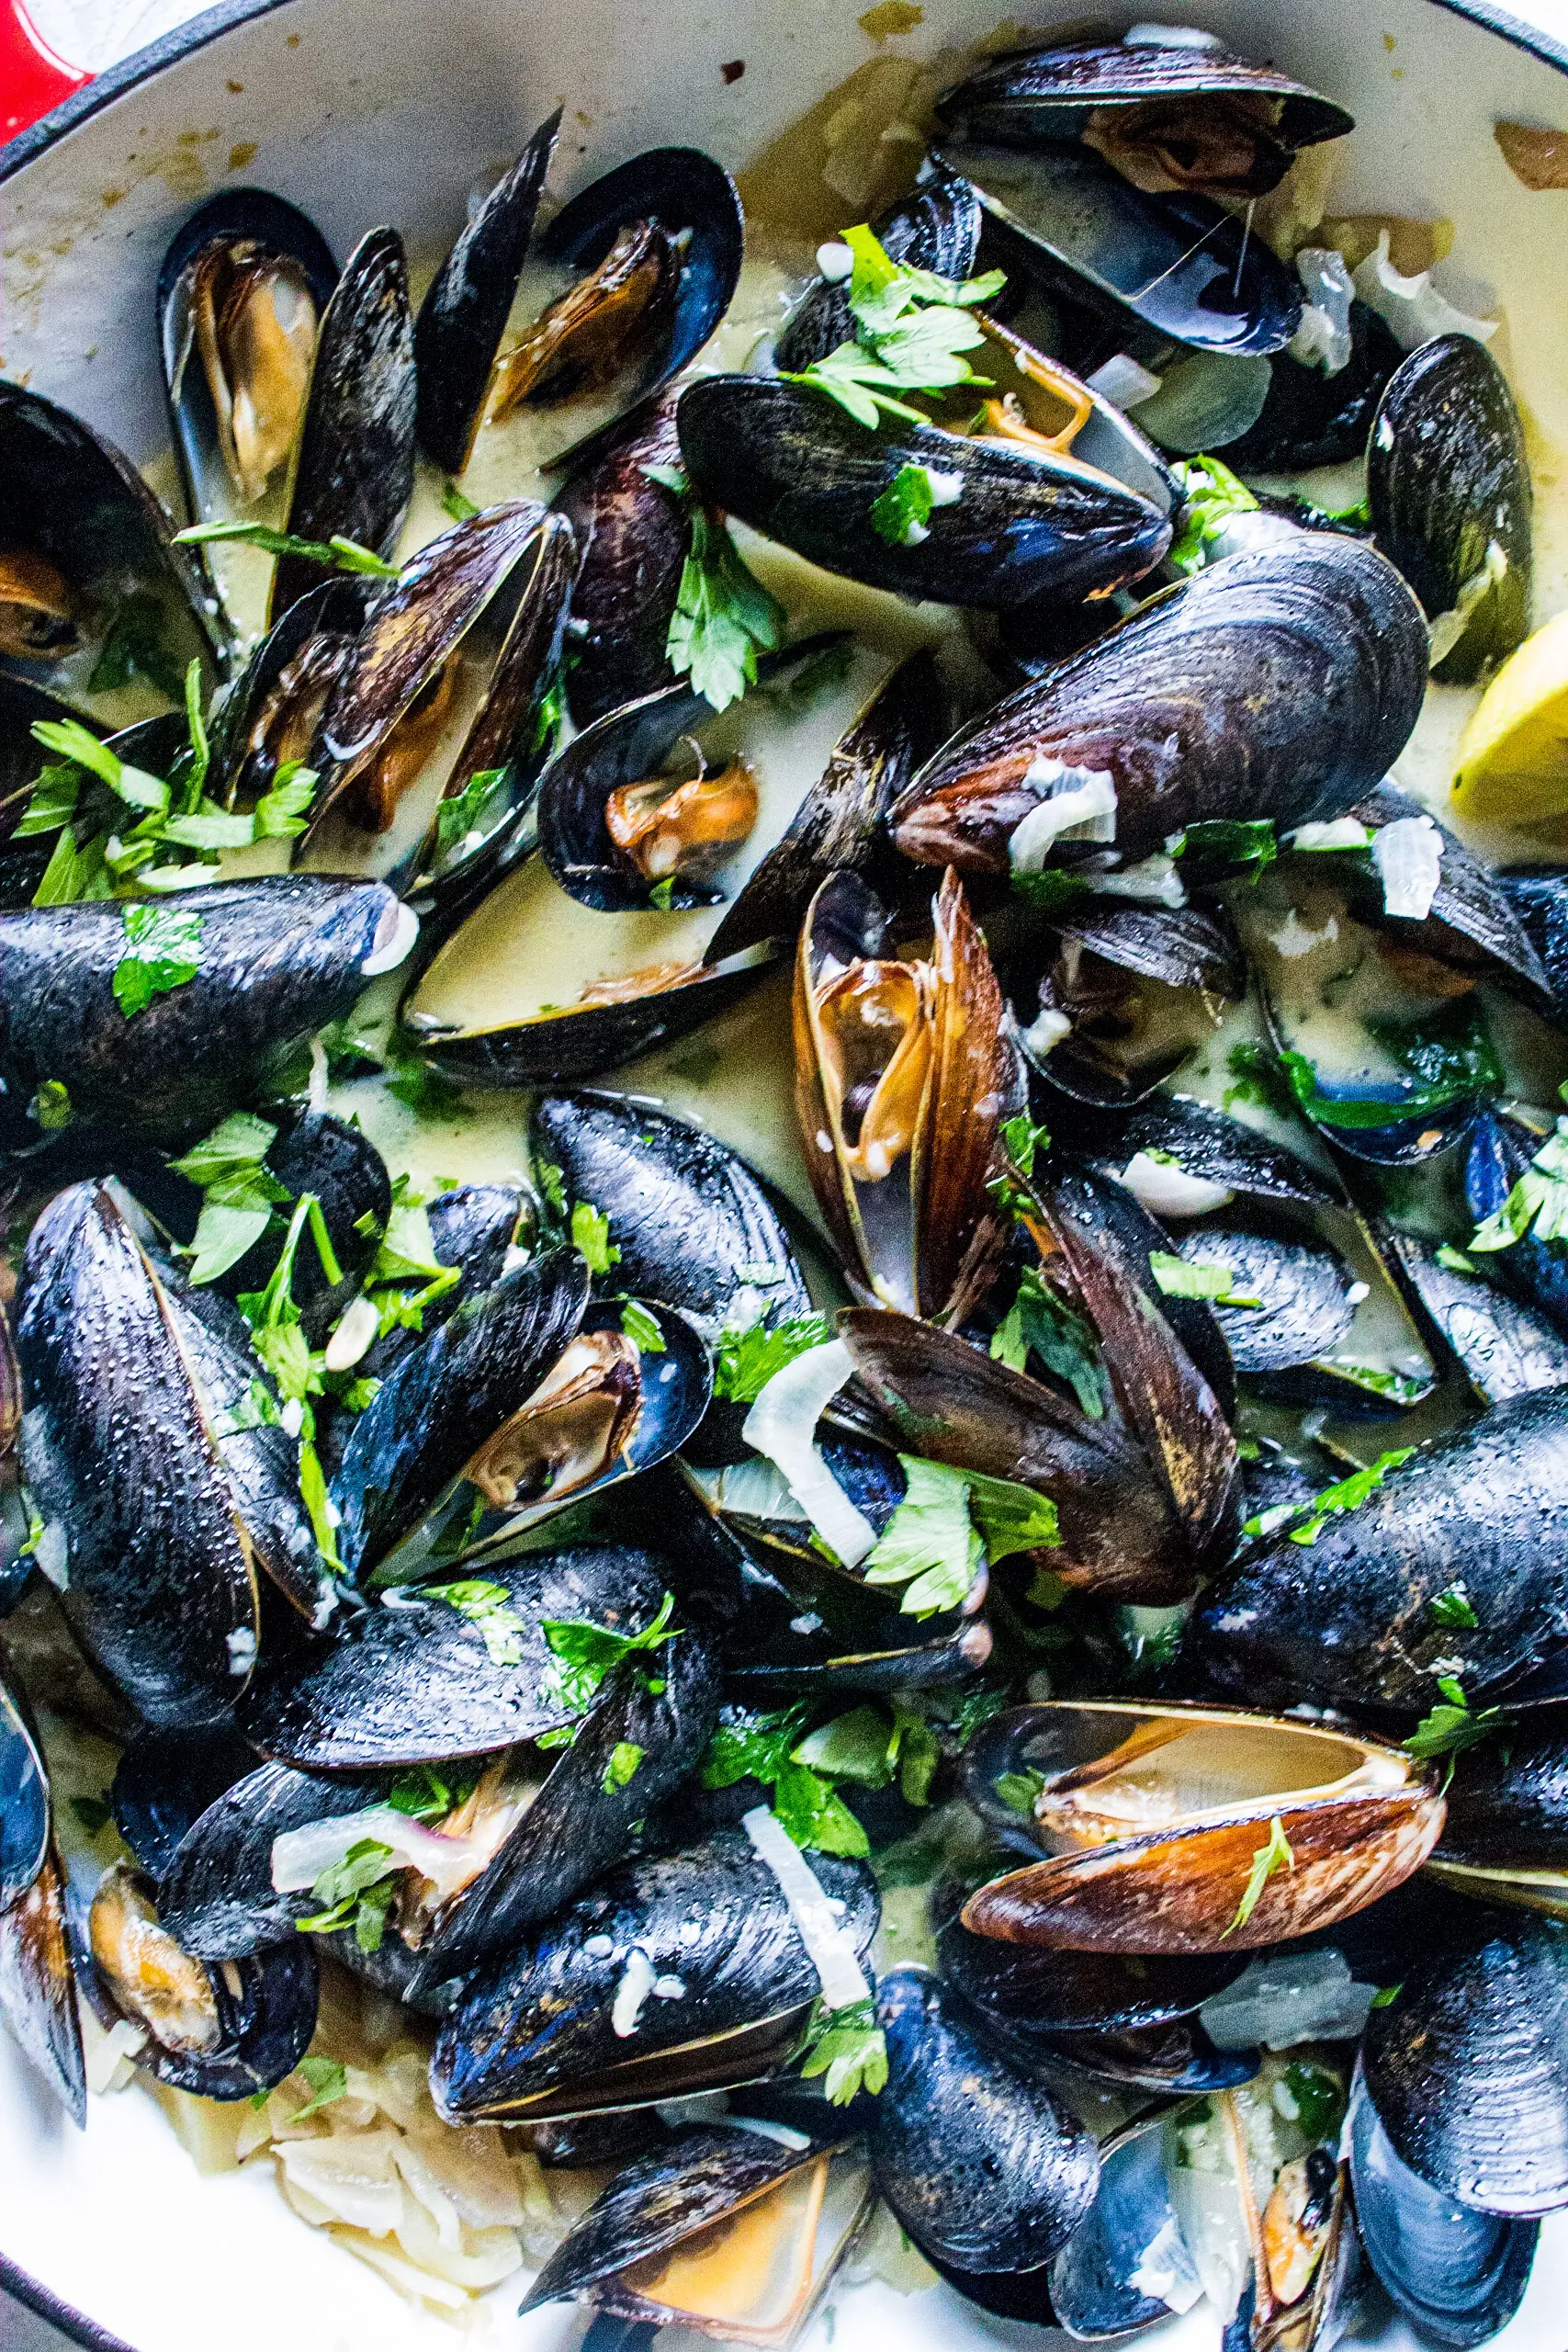 steamed mussels in a white wine and garlic sauce on www.thedanareneeway.com